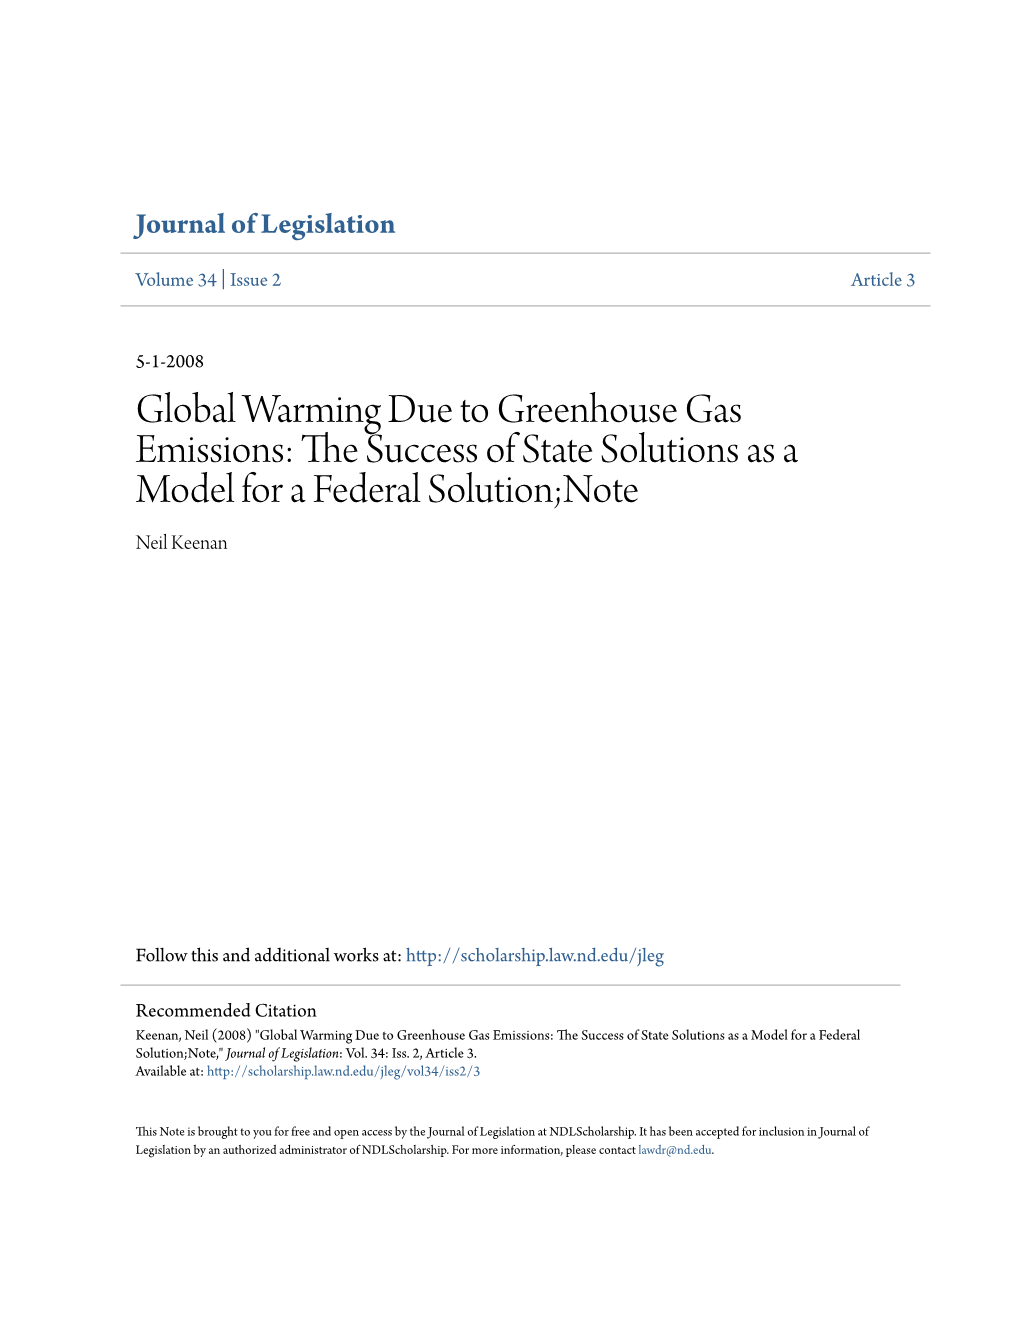 Global Warming Due to Greenhouse Gas Emissions: the Uccess S of State Solutions As a Model for a Federal Solution;Note Neil Keenan